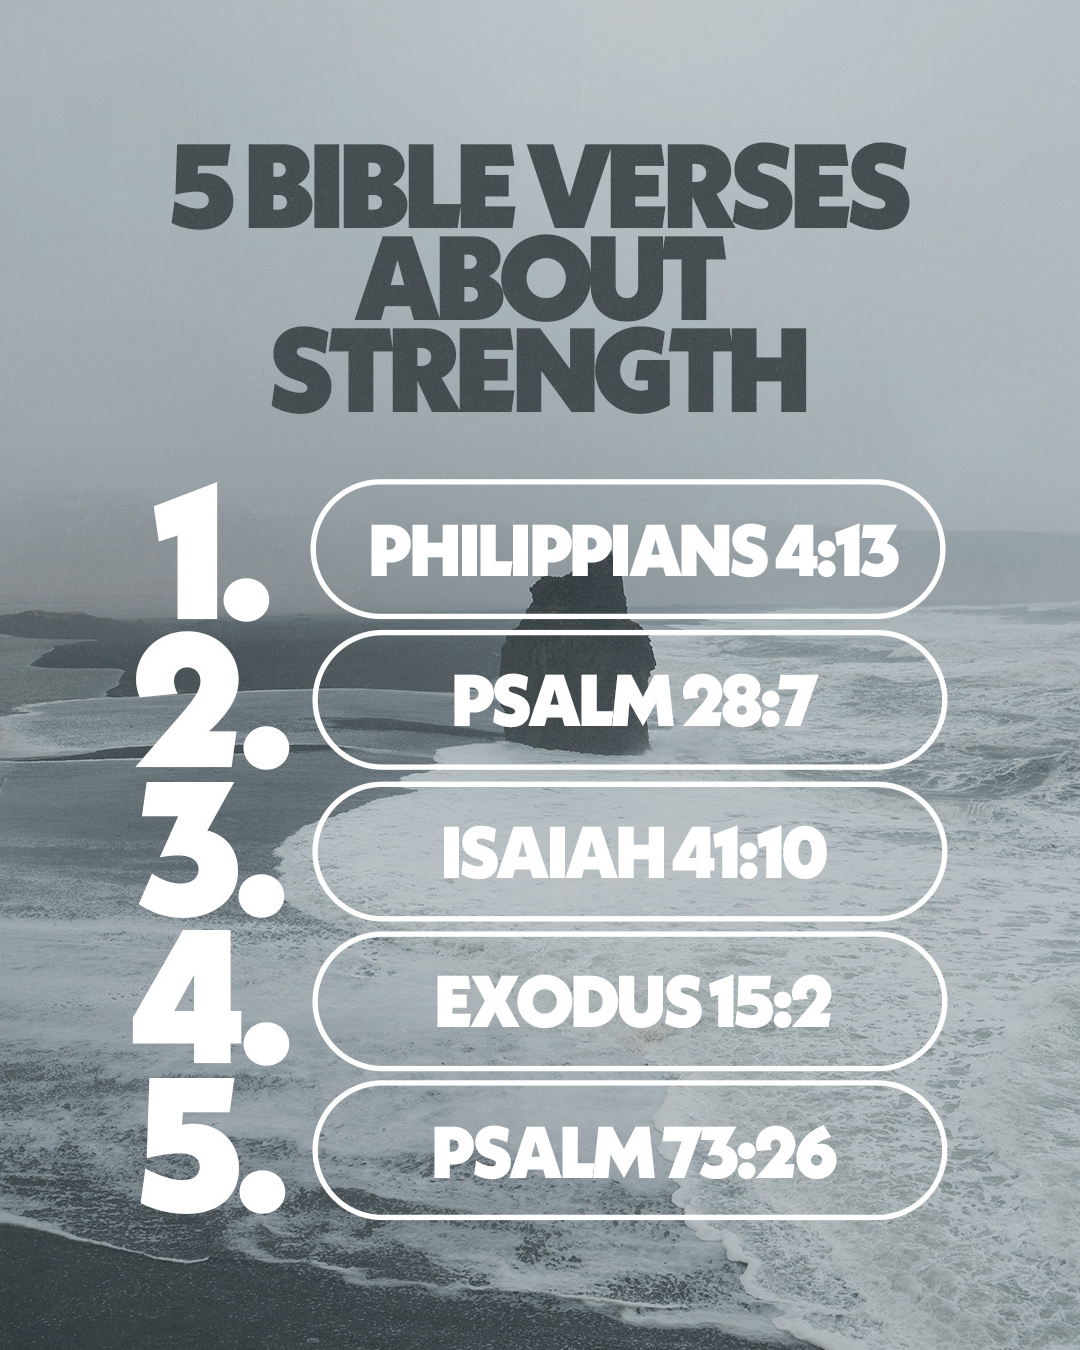 5 Bible verses about strength